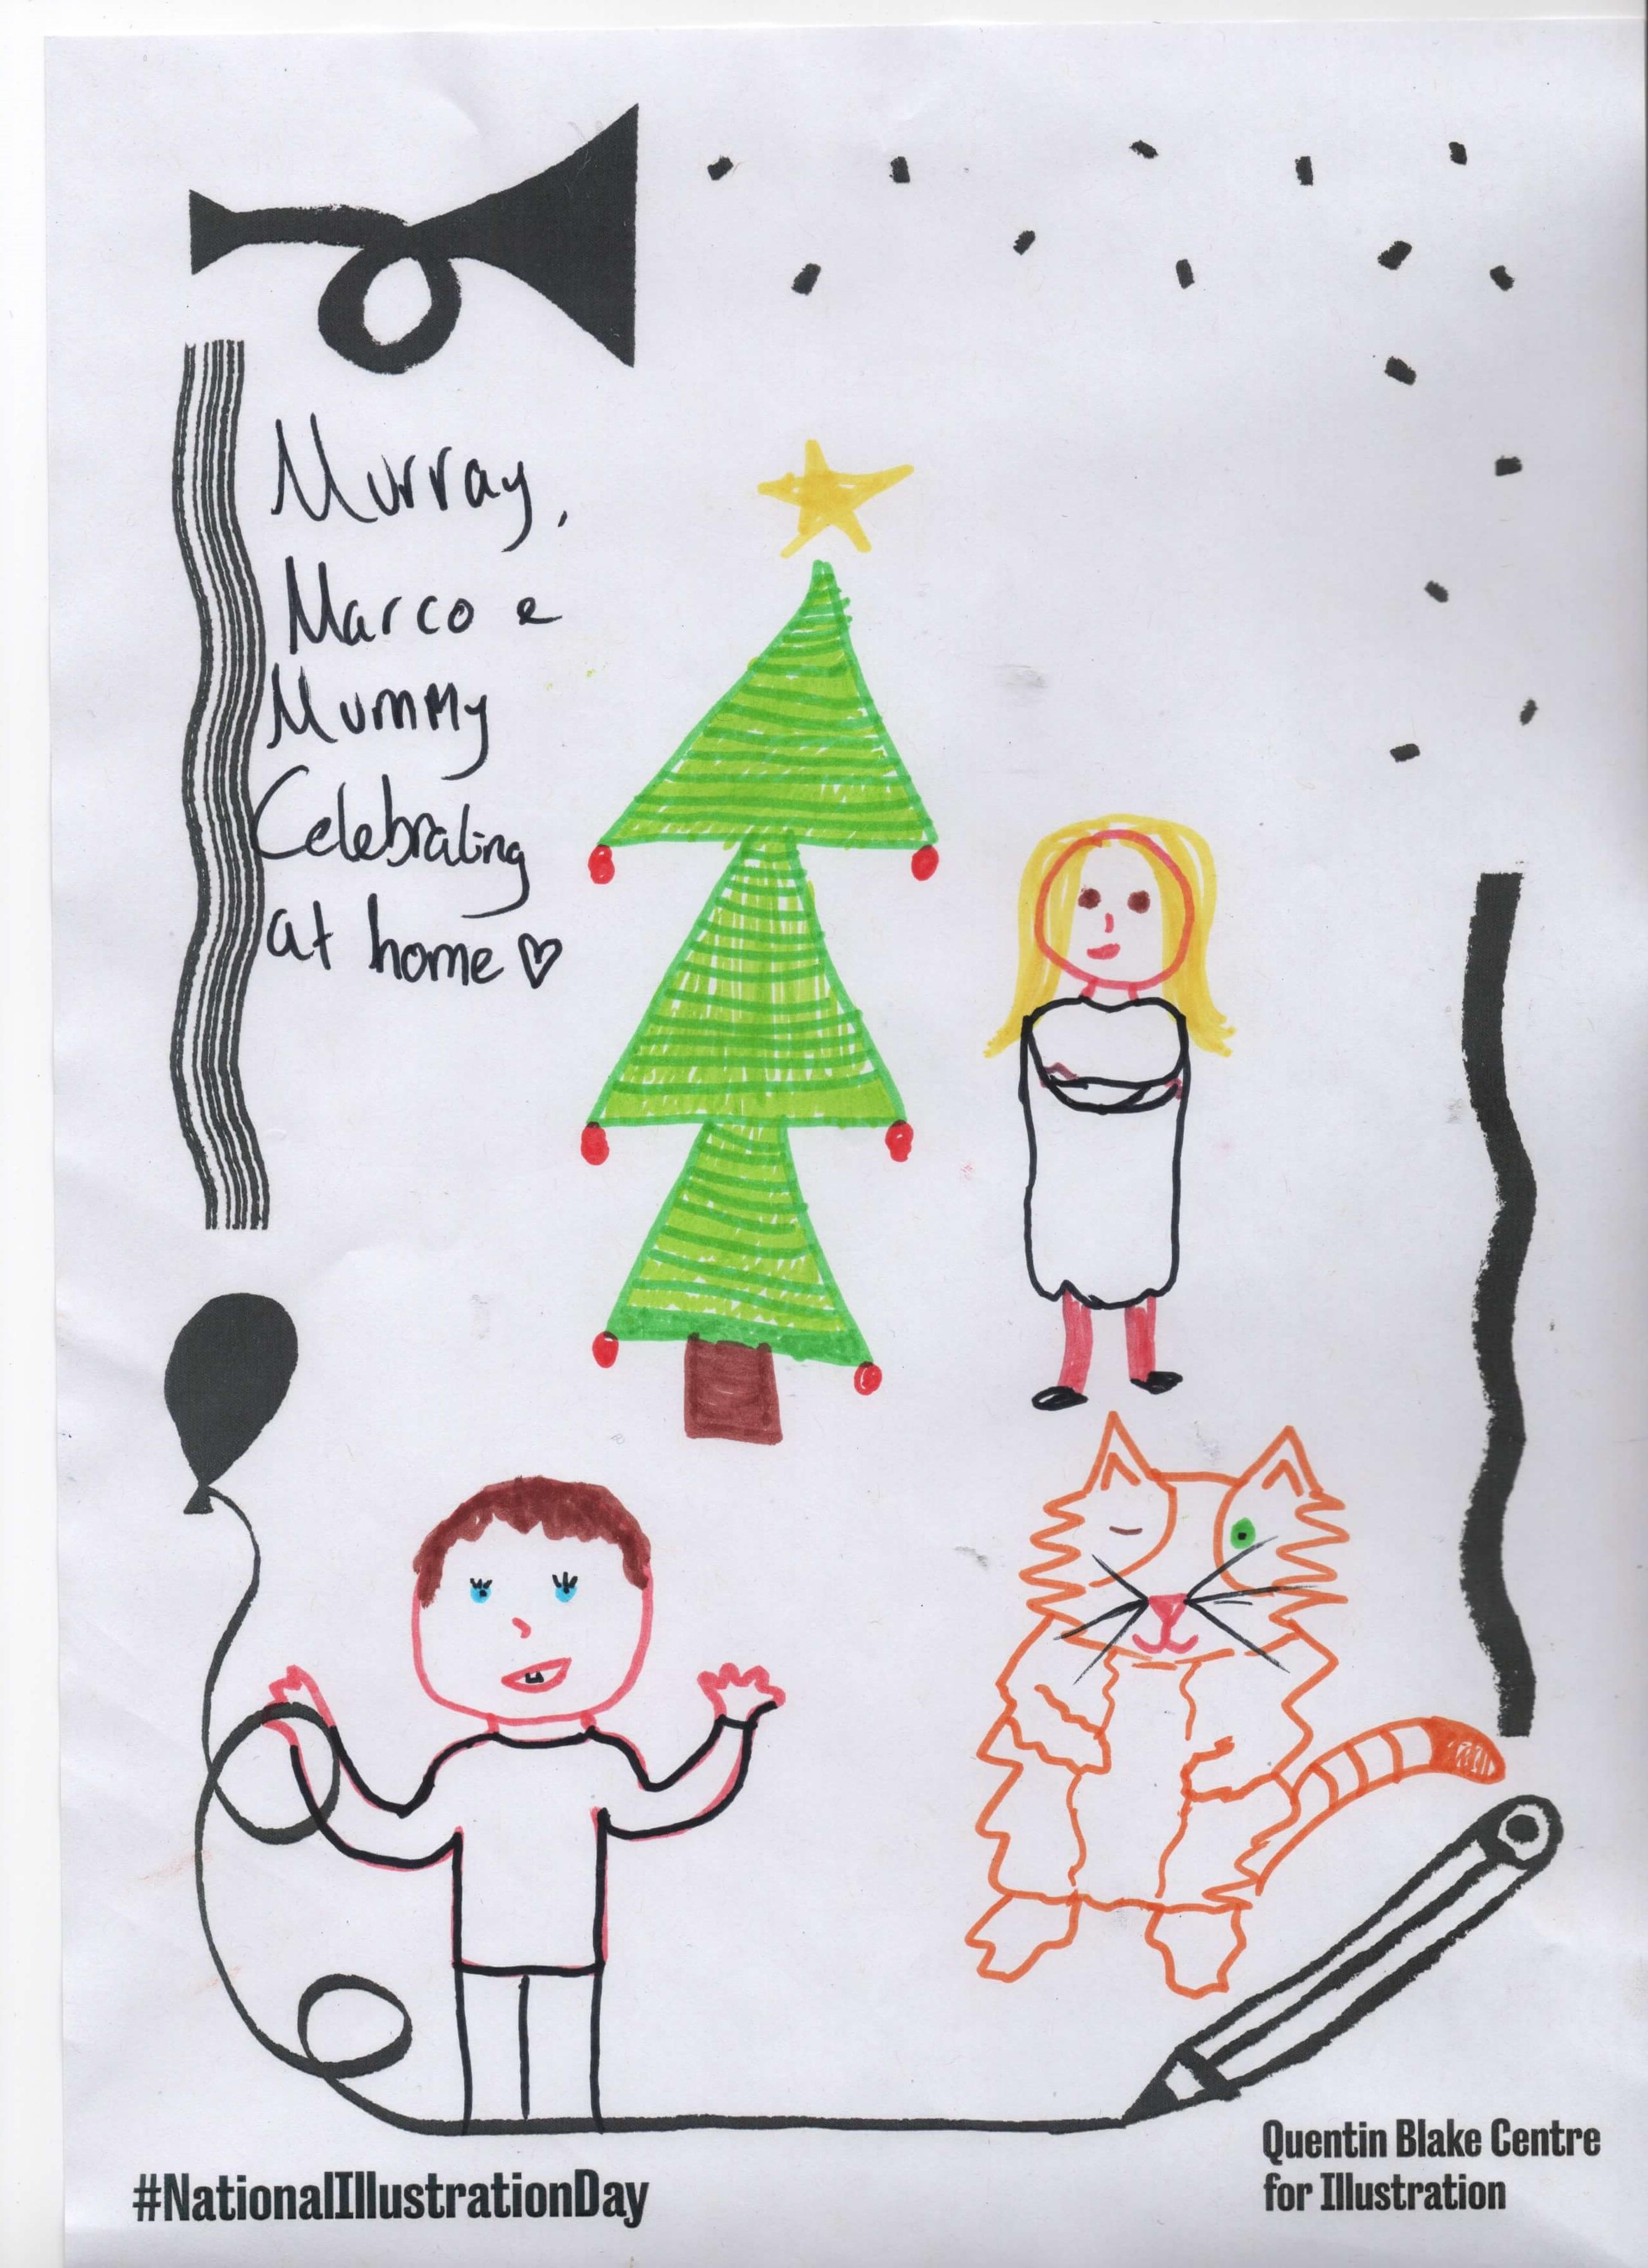 Sketchpen drawing of a child, adult and cat around a Christmas tree with the words "Harry, Marco + Mummy celebrating at home."